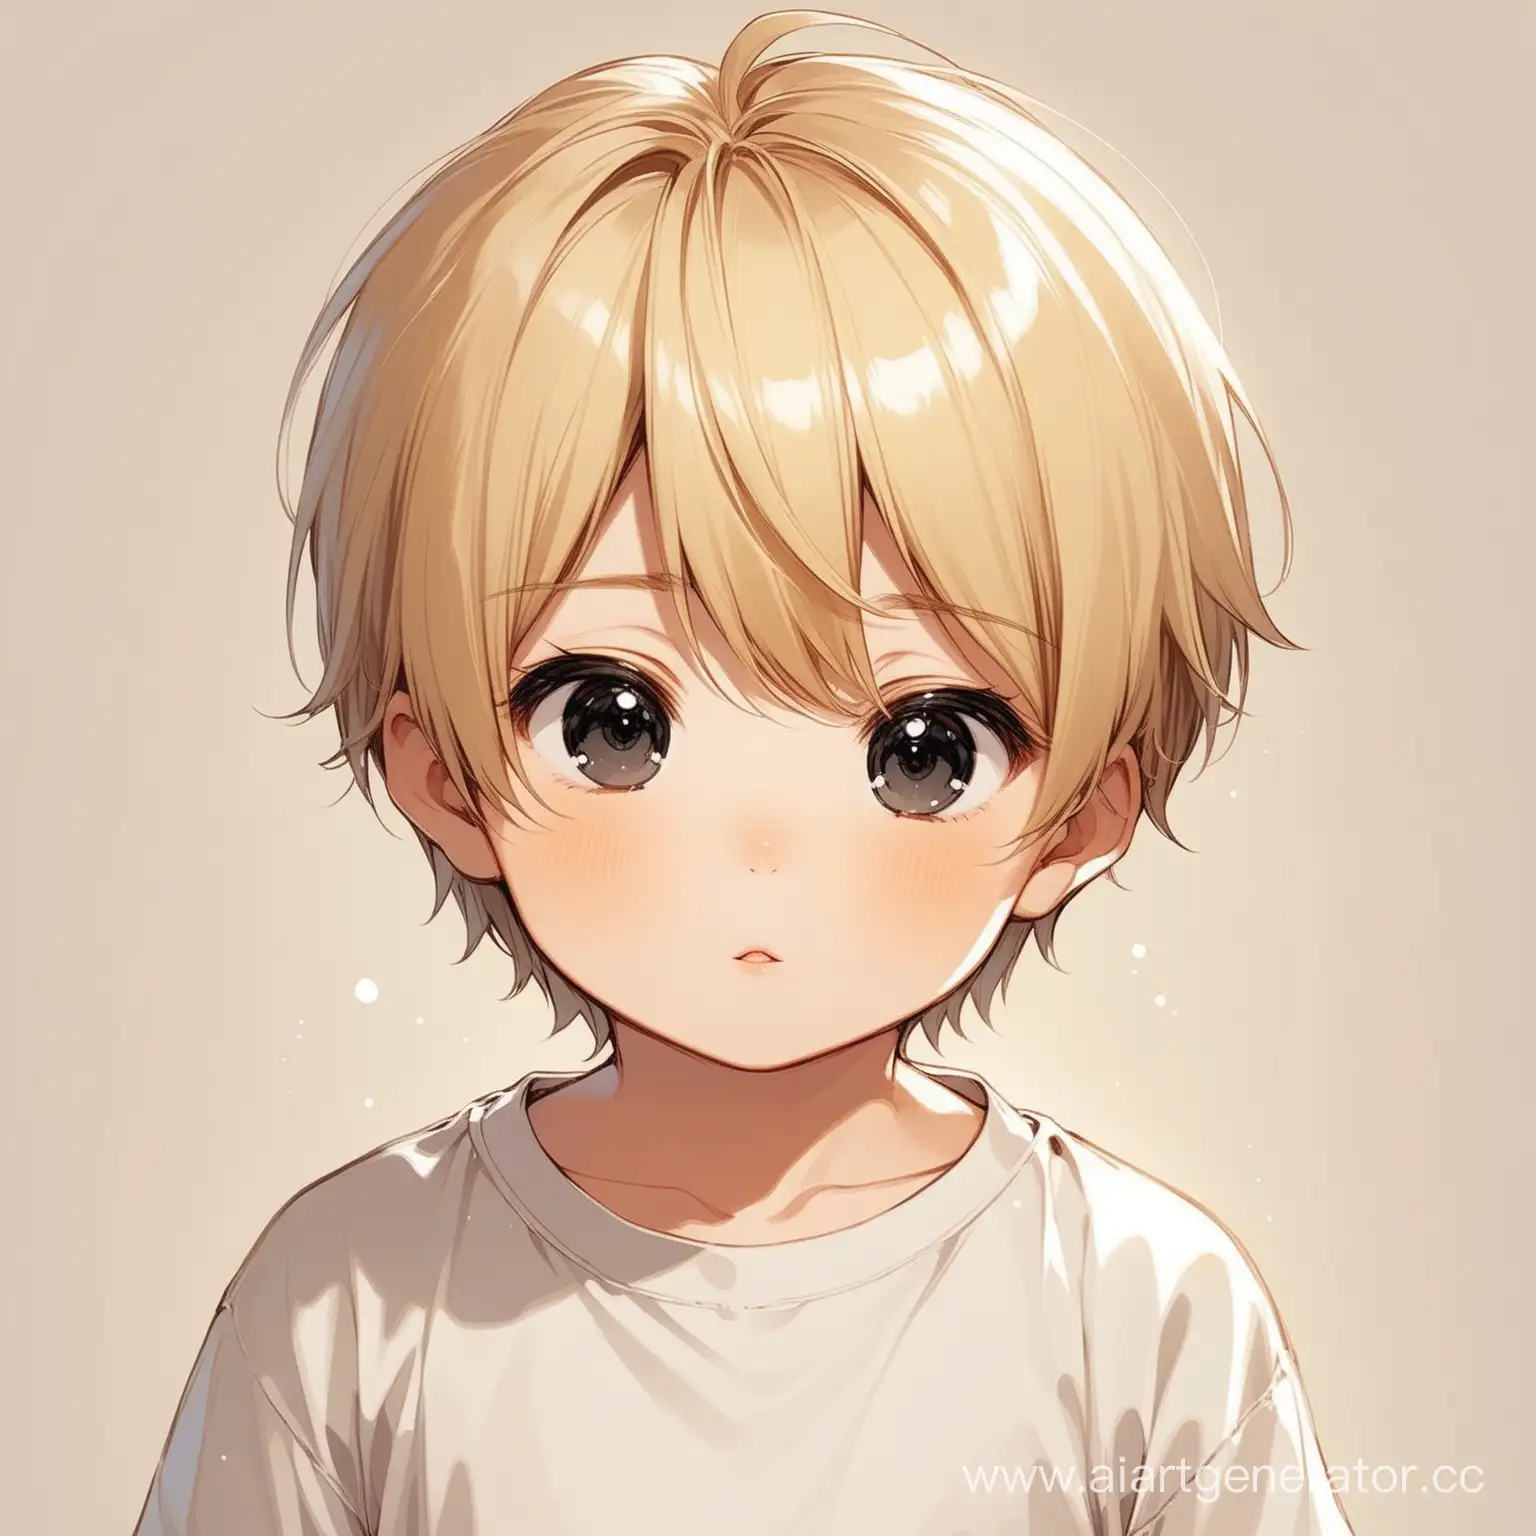 Adorable-Little-Boy-with-Short-Blond-Hair-and-Black-Eyes